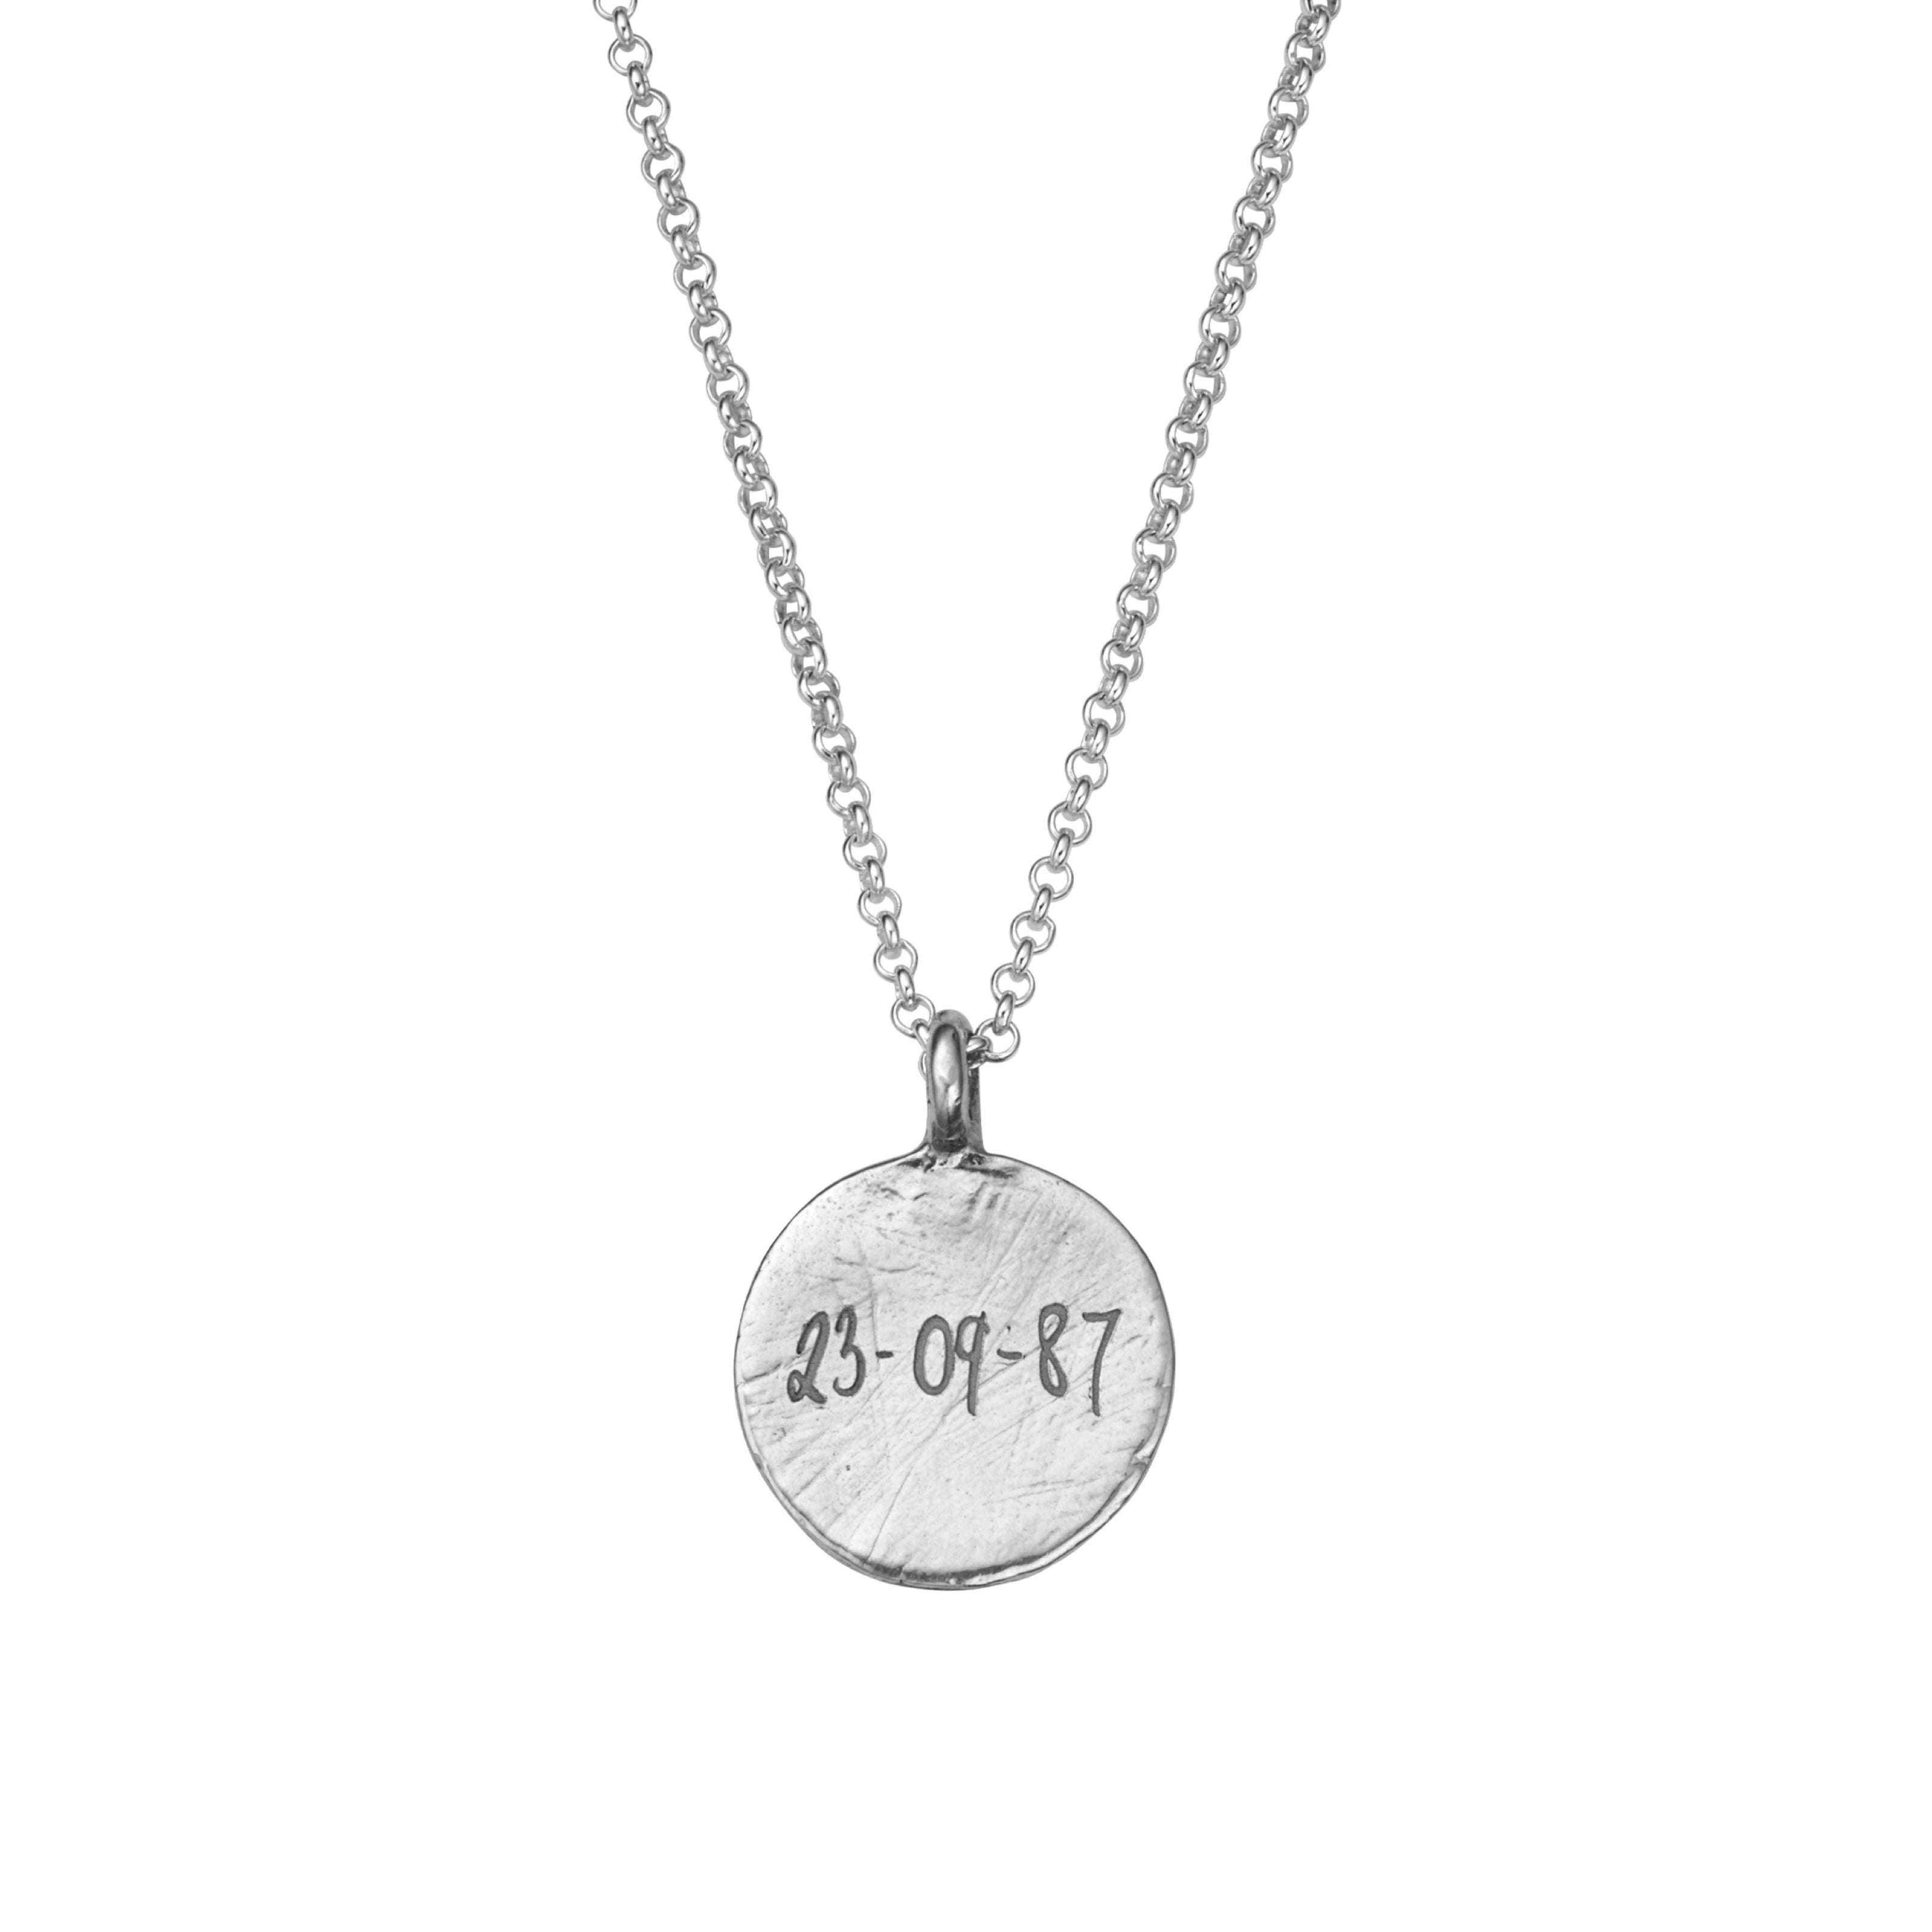 Silver Large Moon Necklace with Handwriting